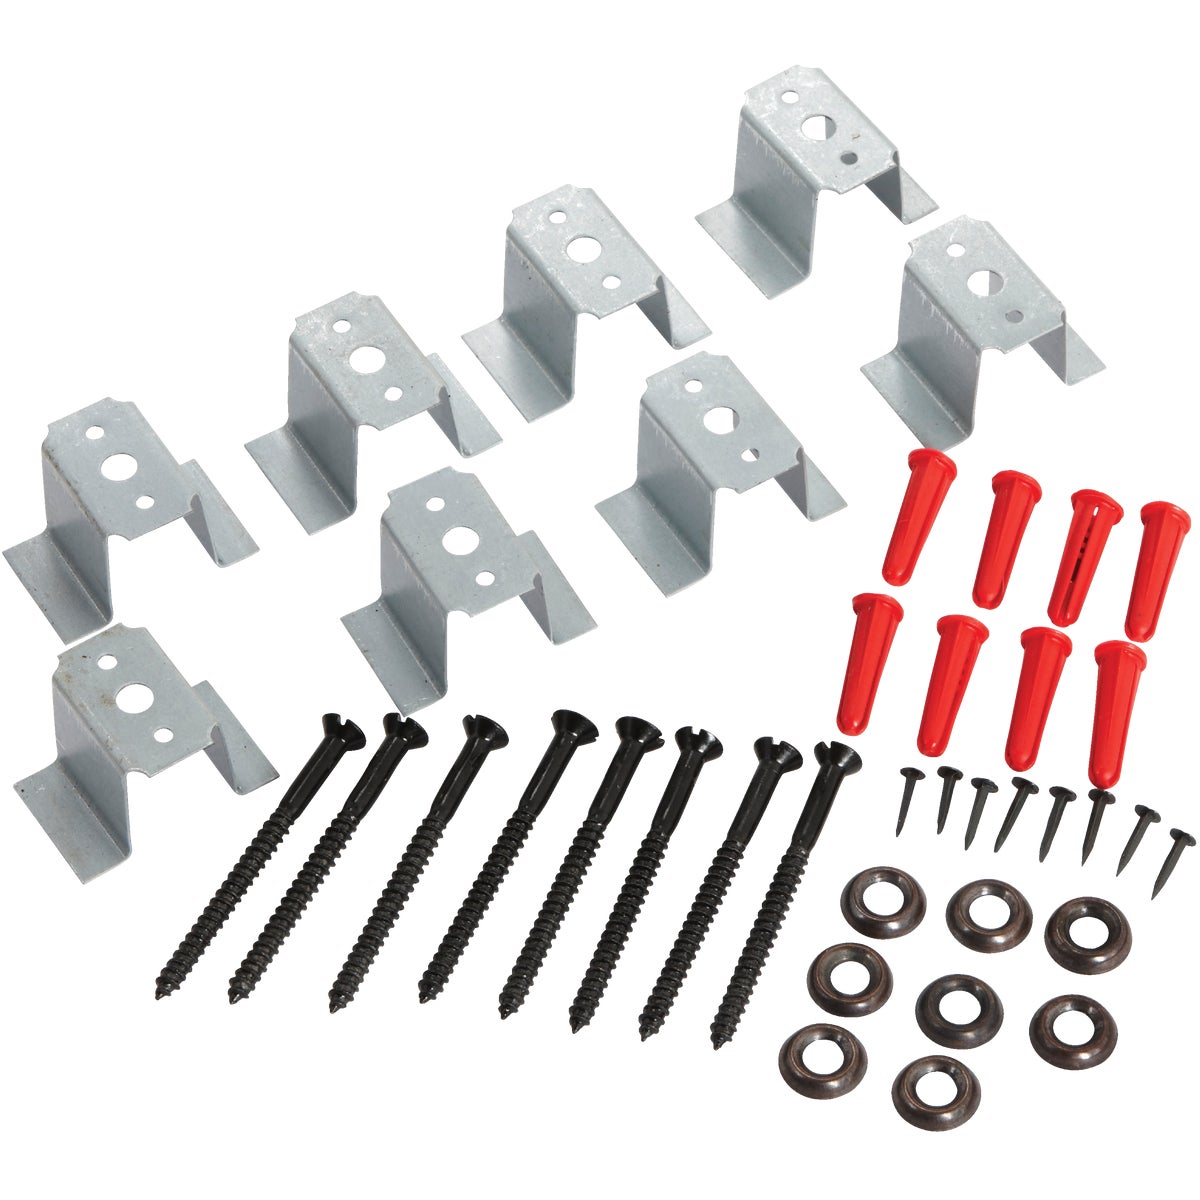 UL WALL SPACER KIT